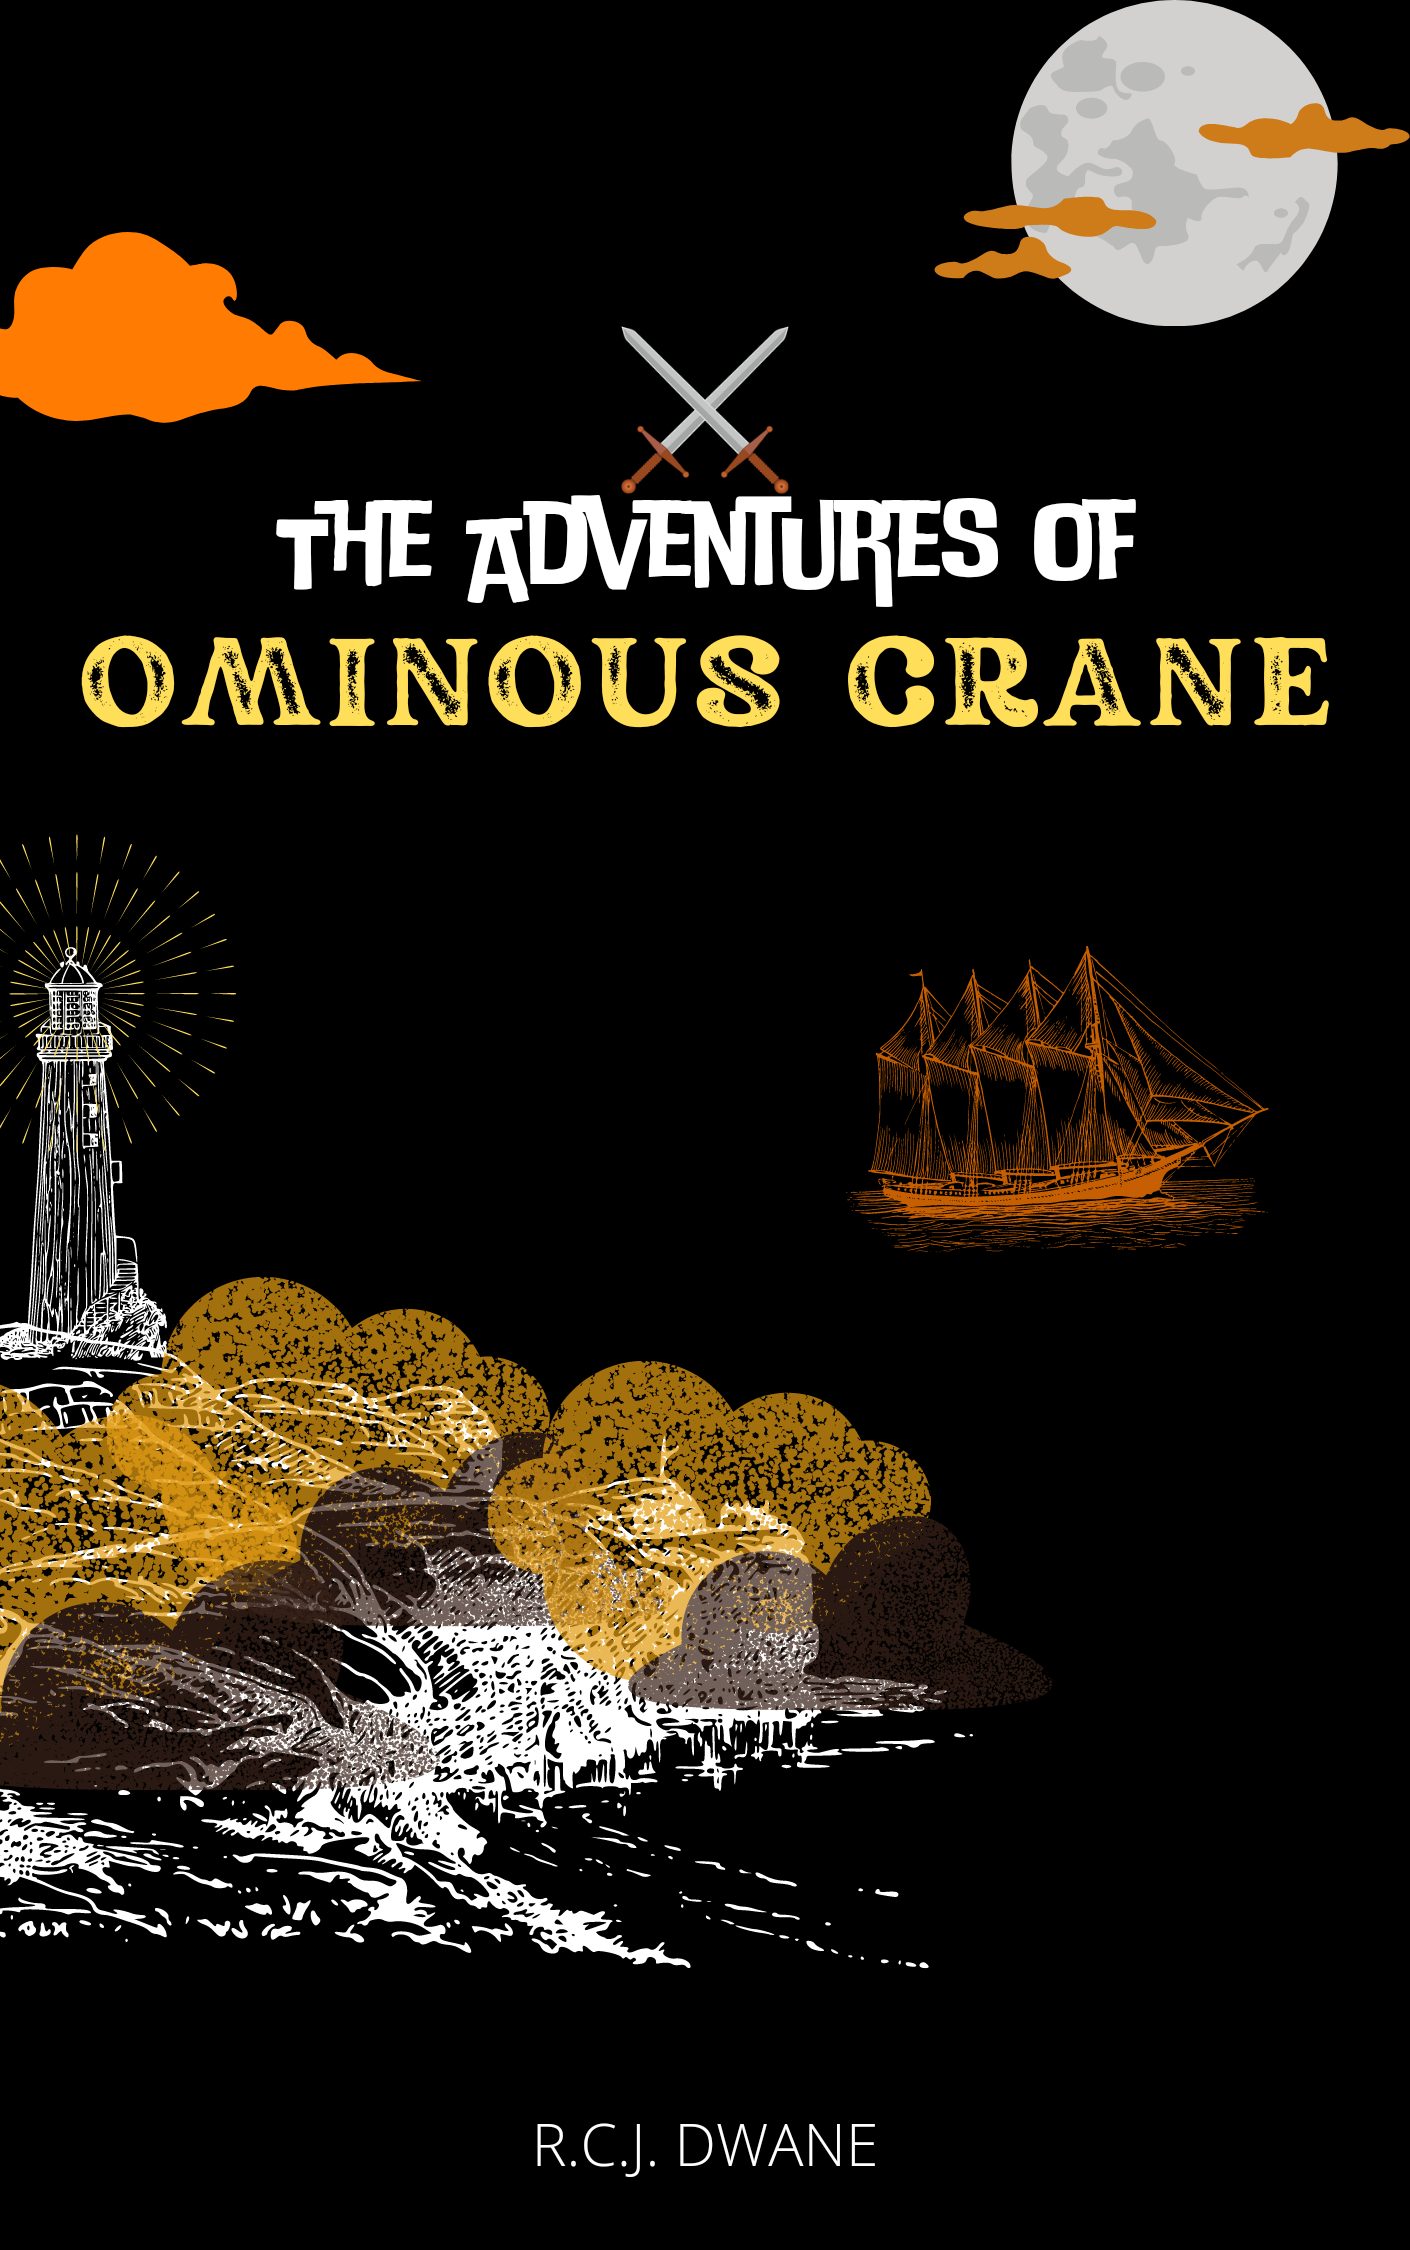 FREE: The Adventures of Ominous Crane by R.C.J. Dwane